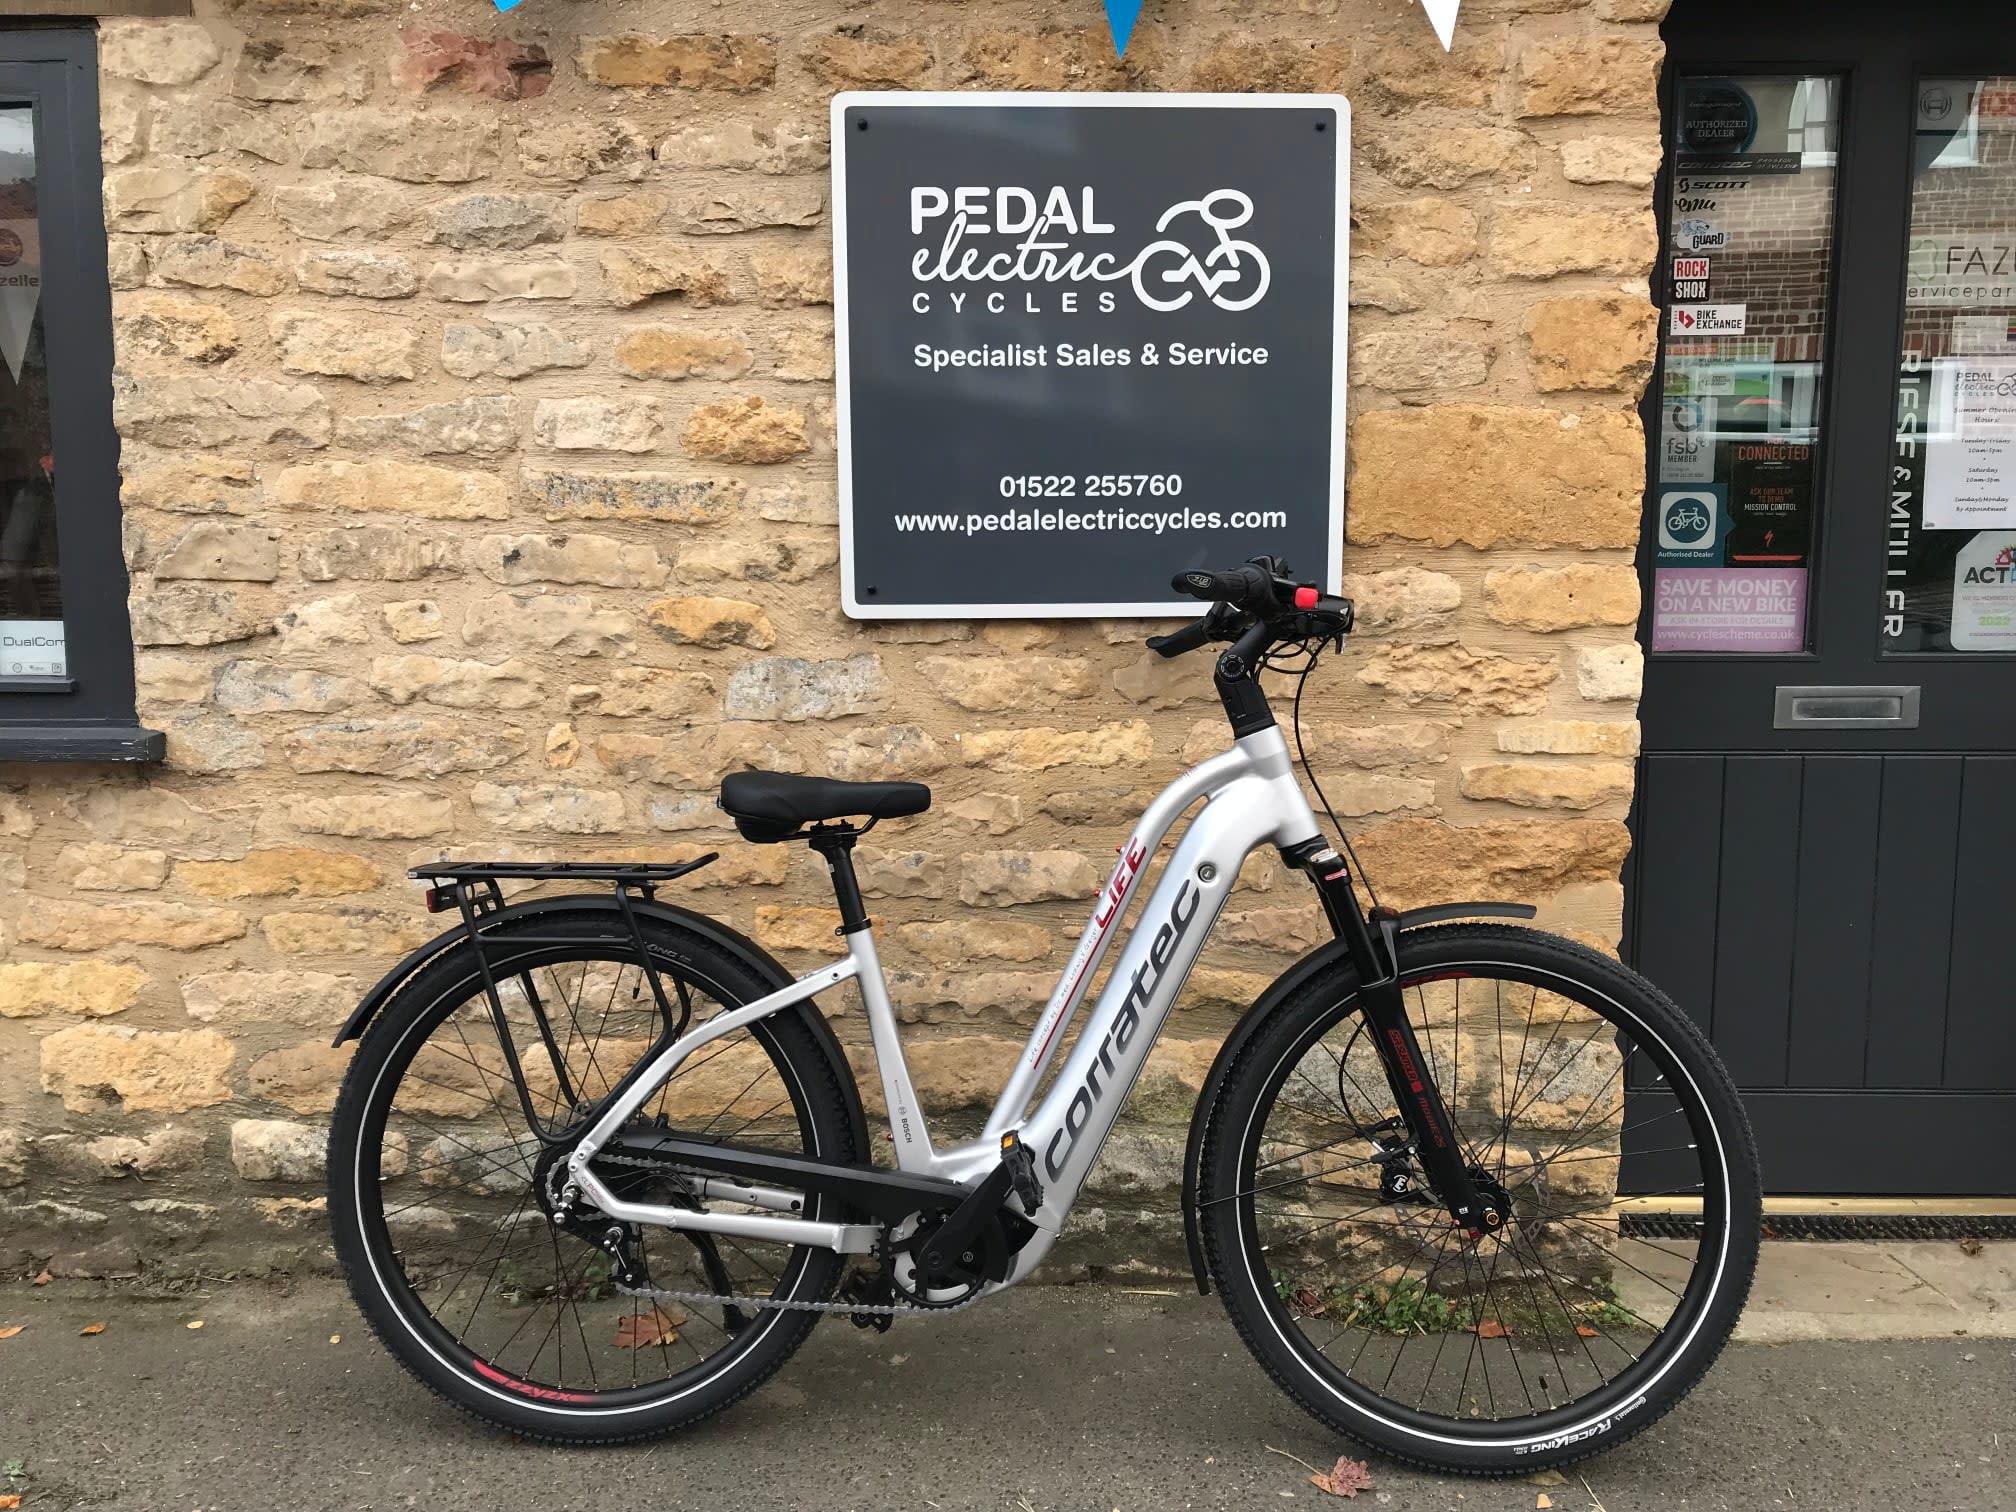 Pedal Electric Cycles Lincoln 01522 255760